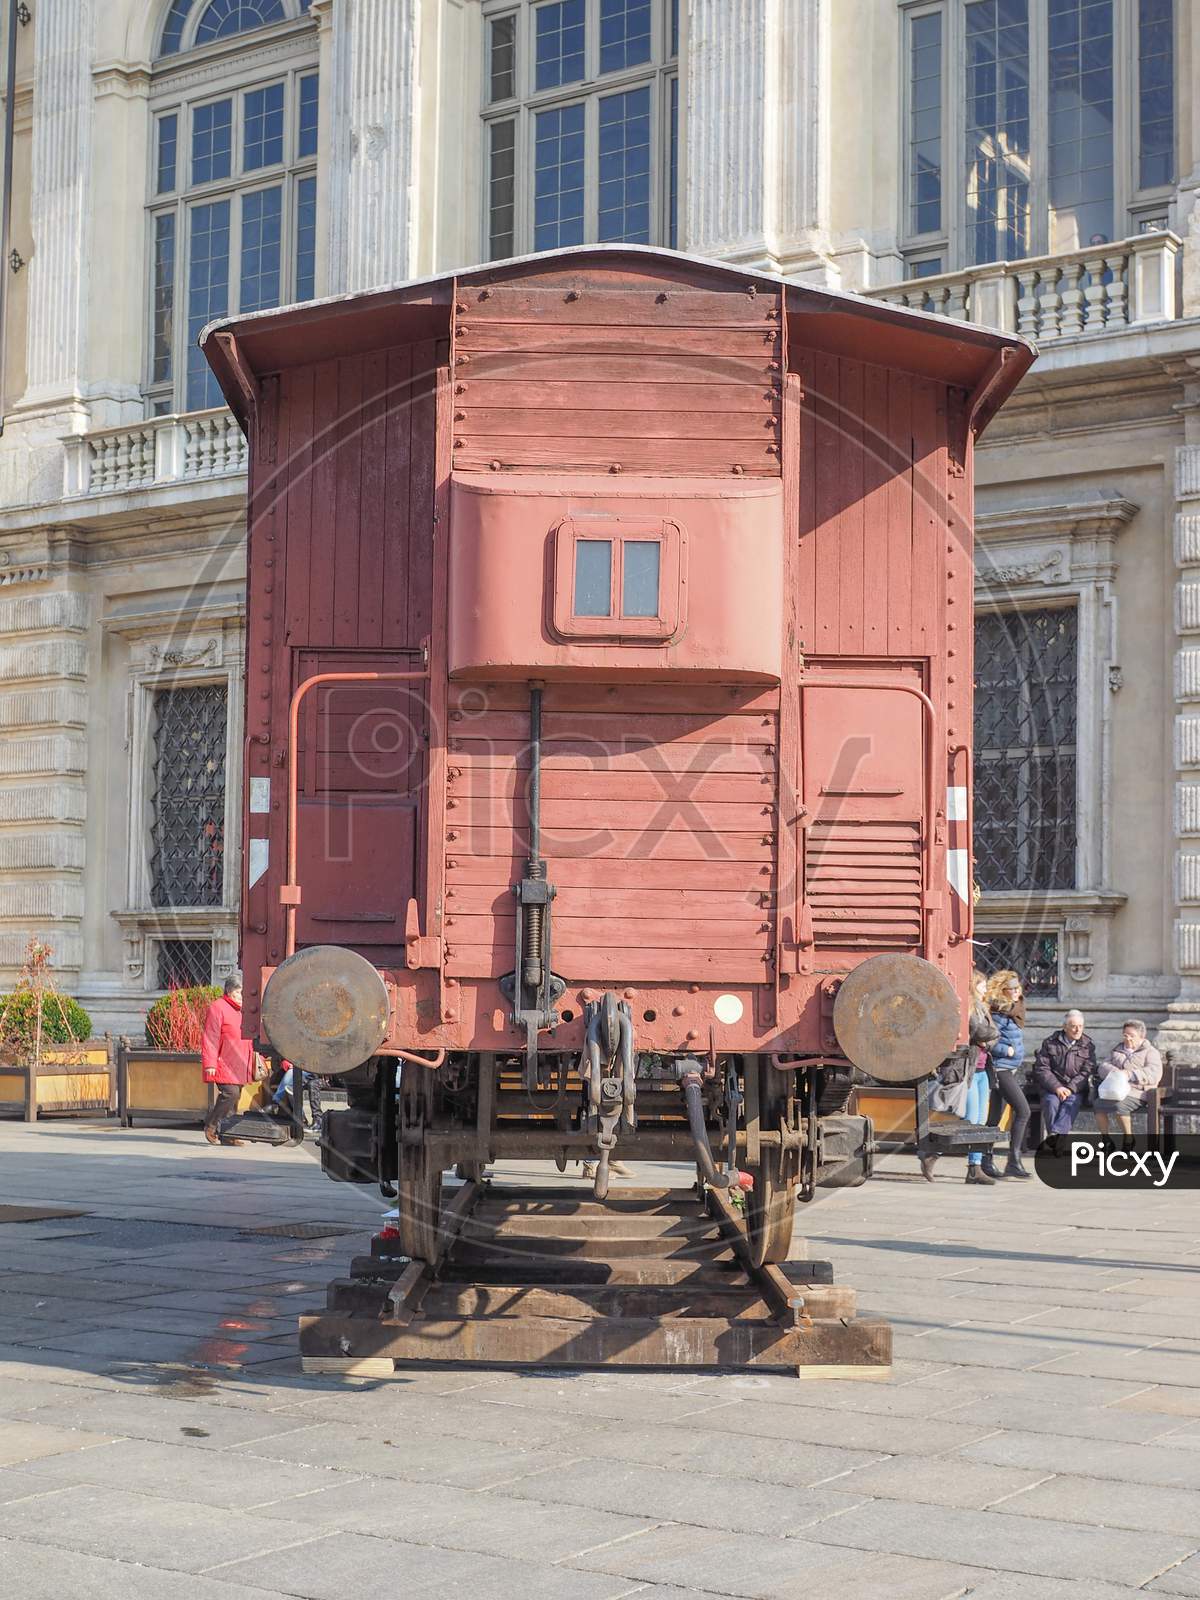 Turin, Italy - February 19, 2015: People Visiting An Holocaust Train For Deportation Of Jews To Concentration Forced Labour And Extermination Camps To Mark The Primo Levi Exhibition In Piazza Castello